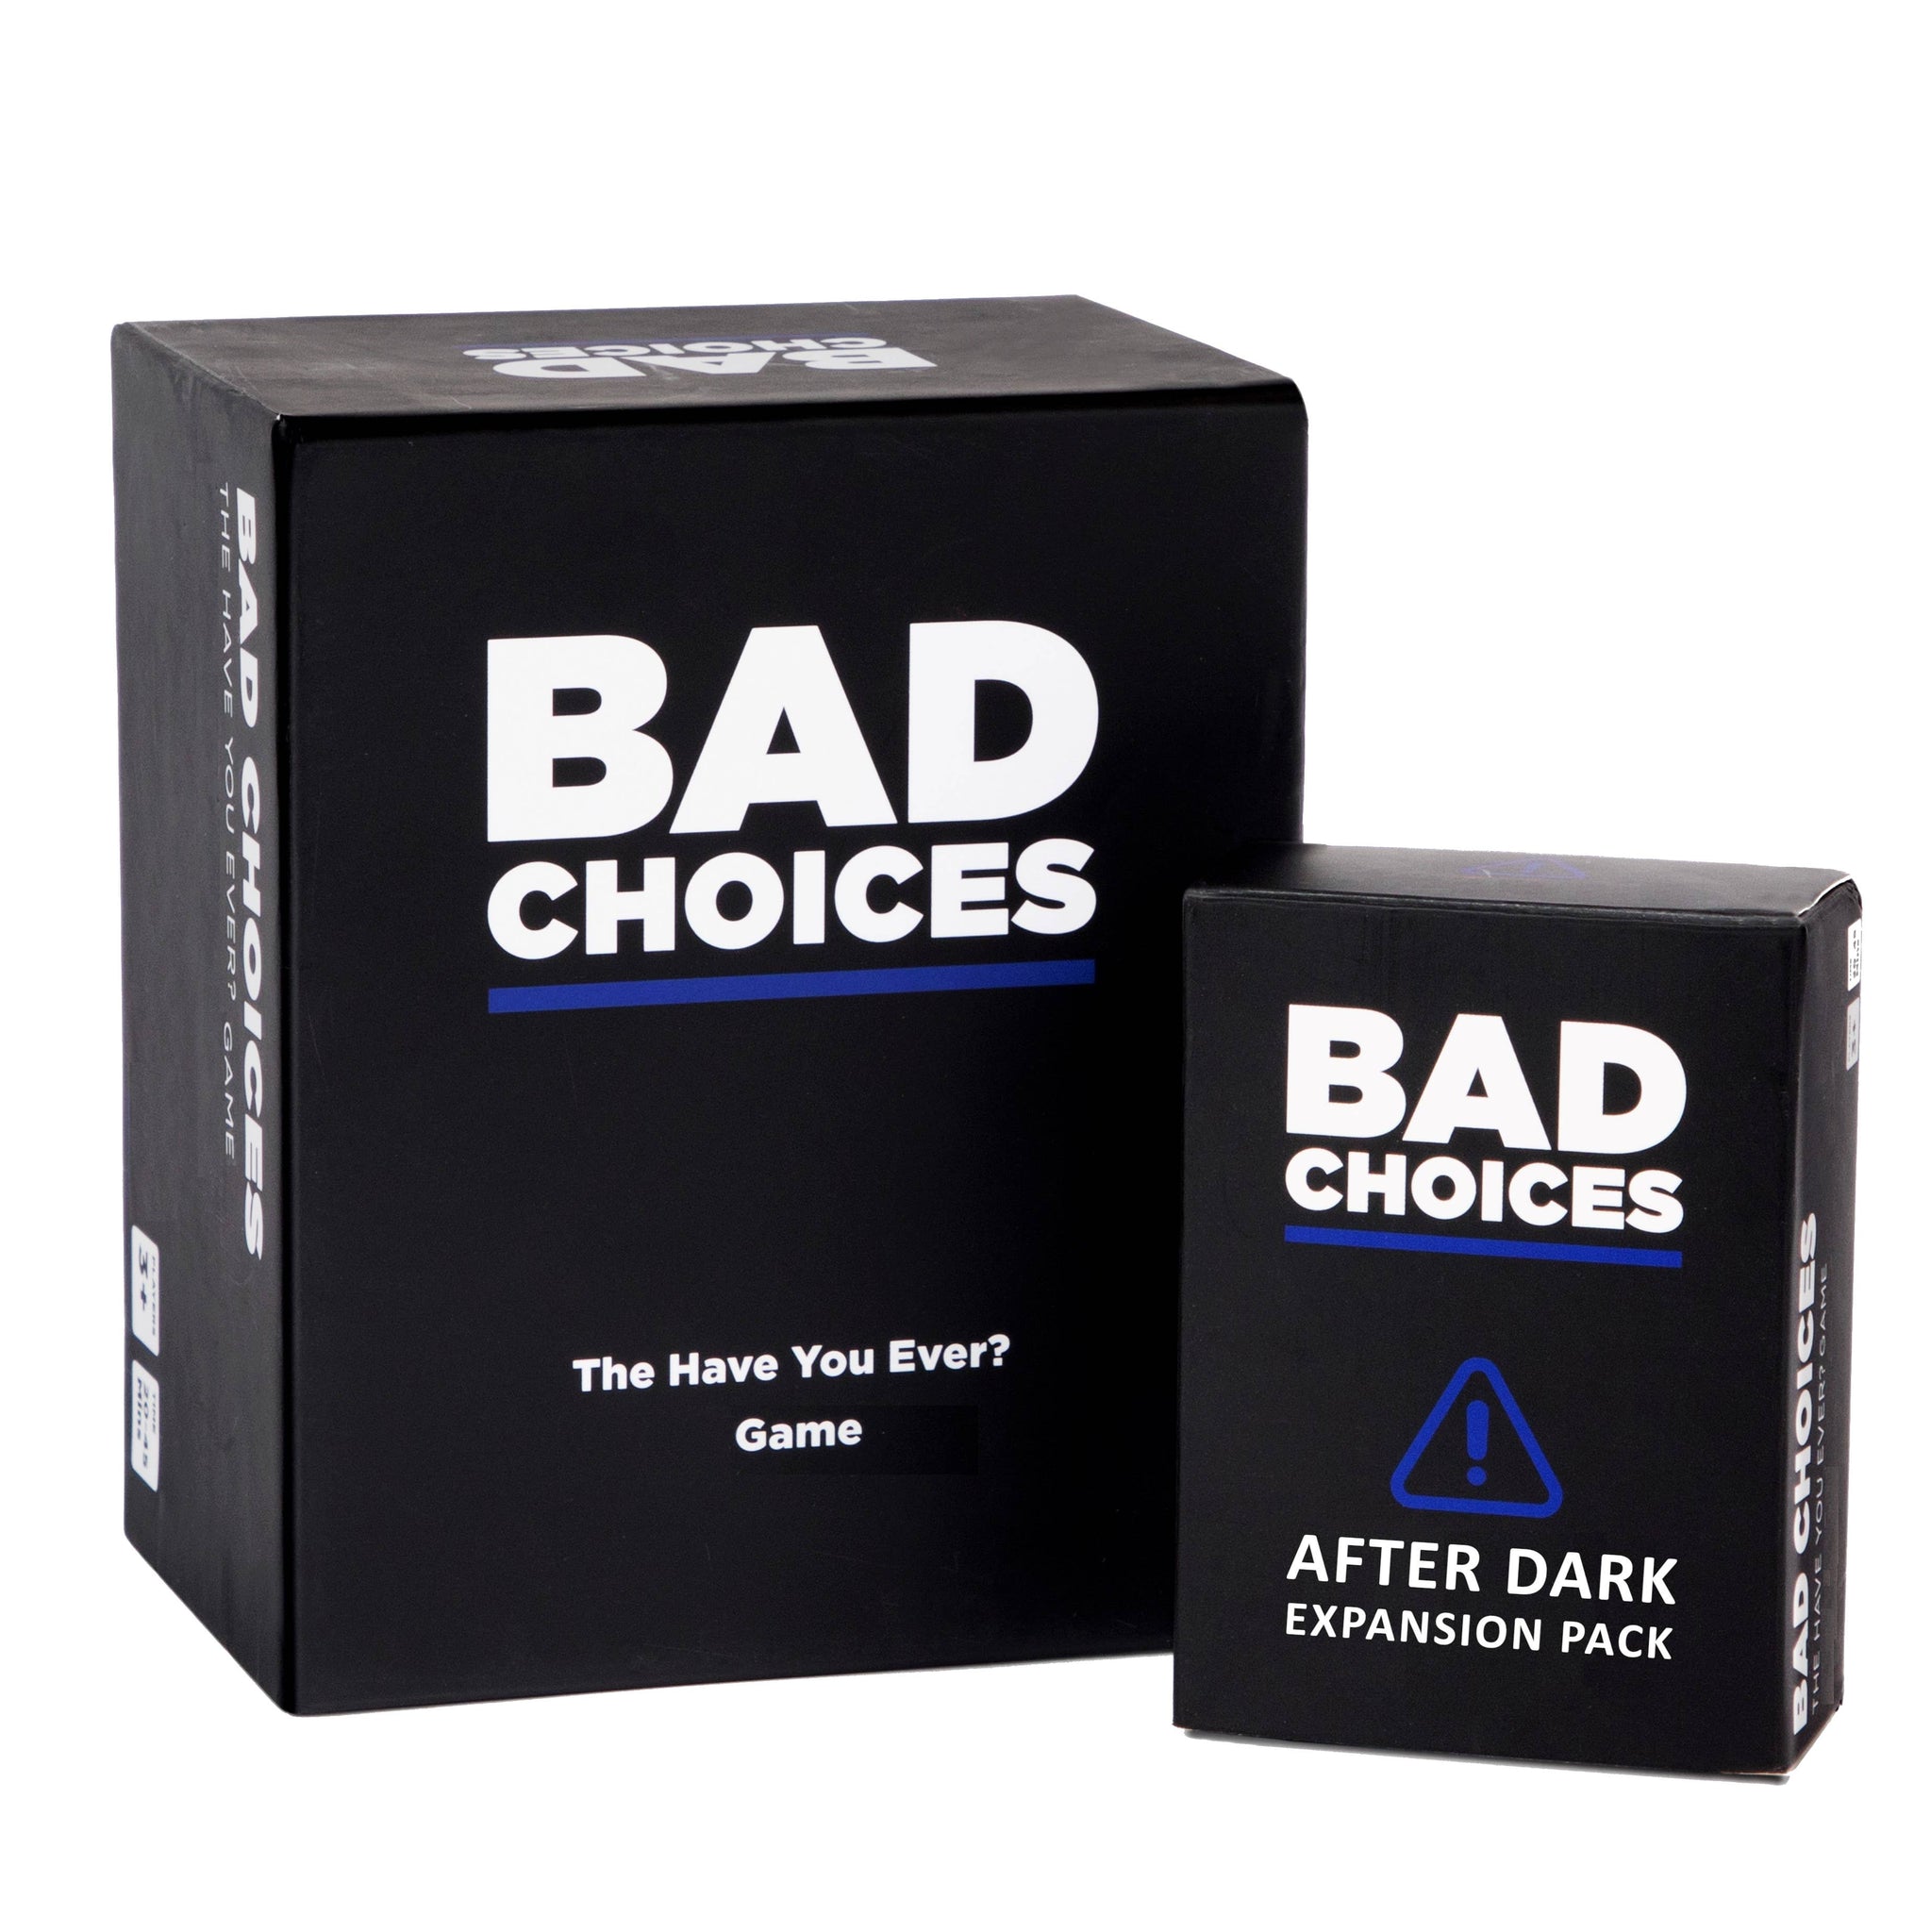 BAD CHOICES: The Have You Ever? Game + After Dark Edition